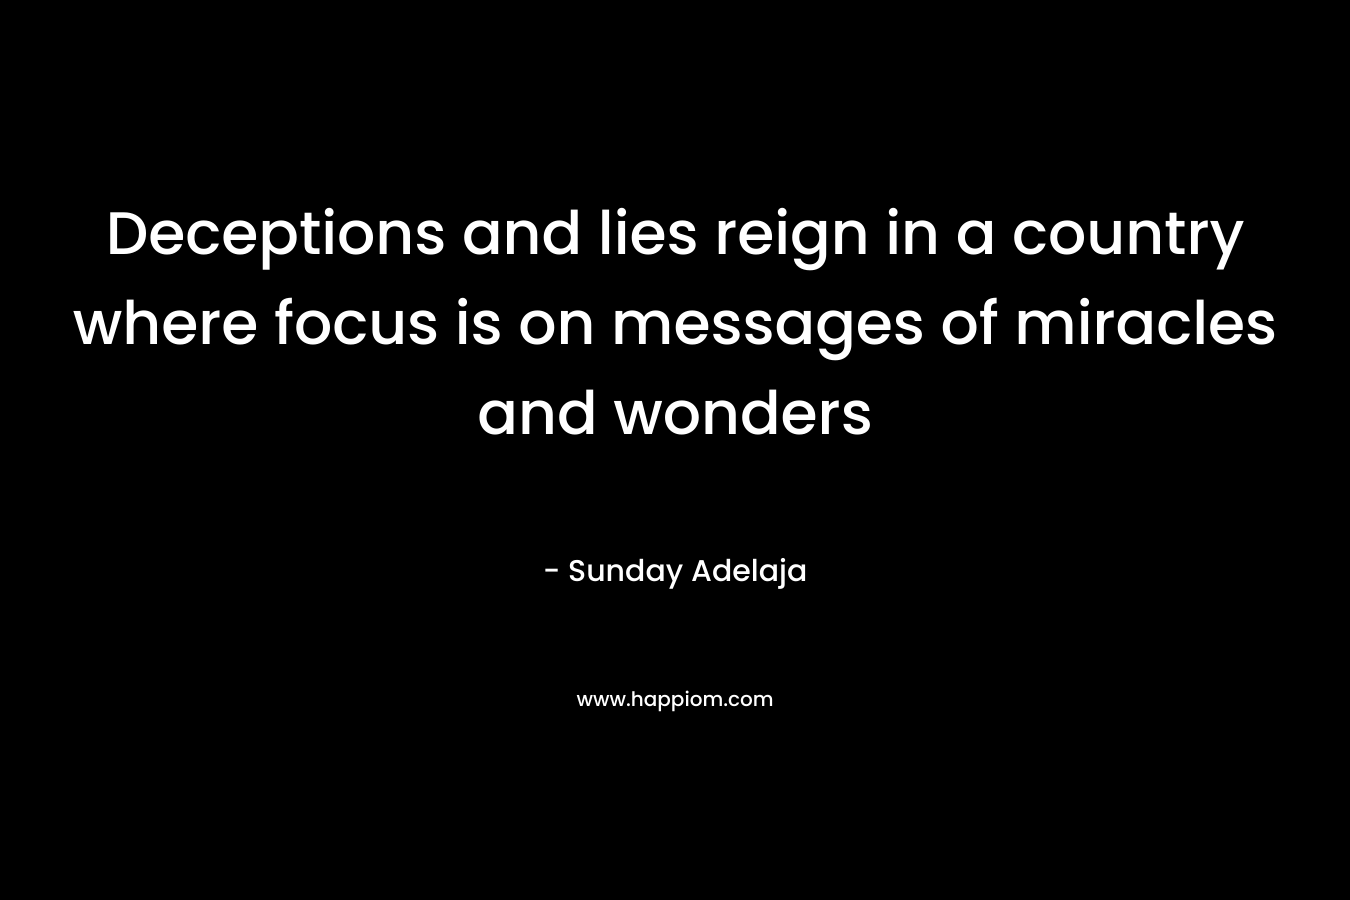 Deceptions and lies reign in a country where focus is on messages of miracles and wonders – Sunday Adelaja